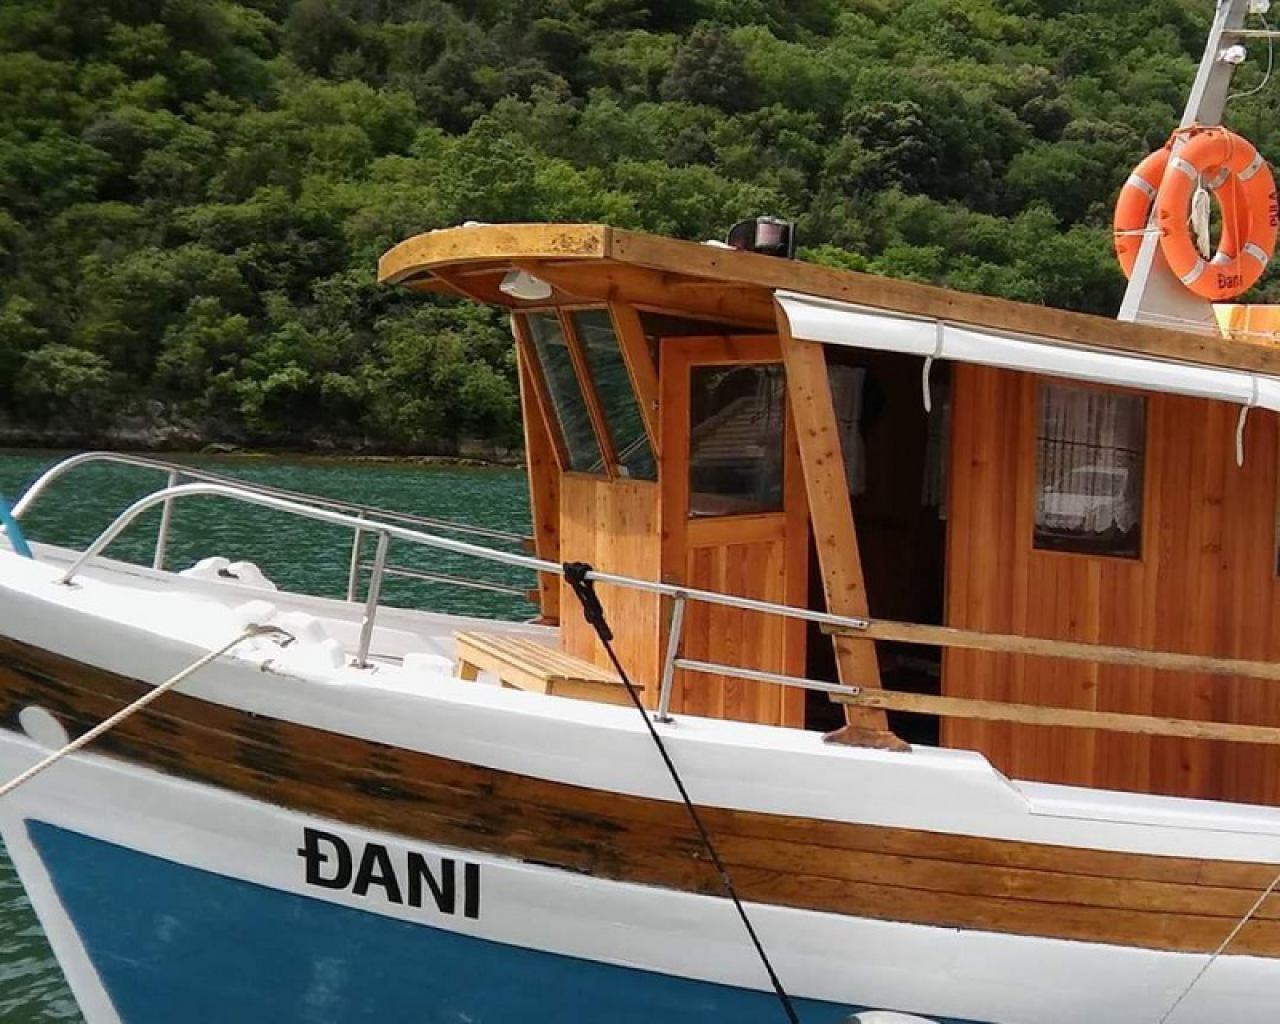 LIM CHANNEL BOAT TOUR IN ISTRIA